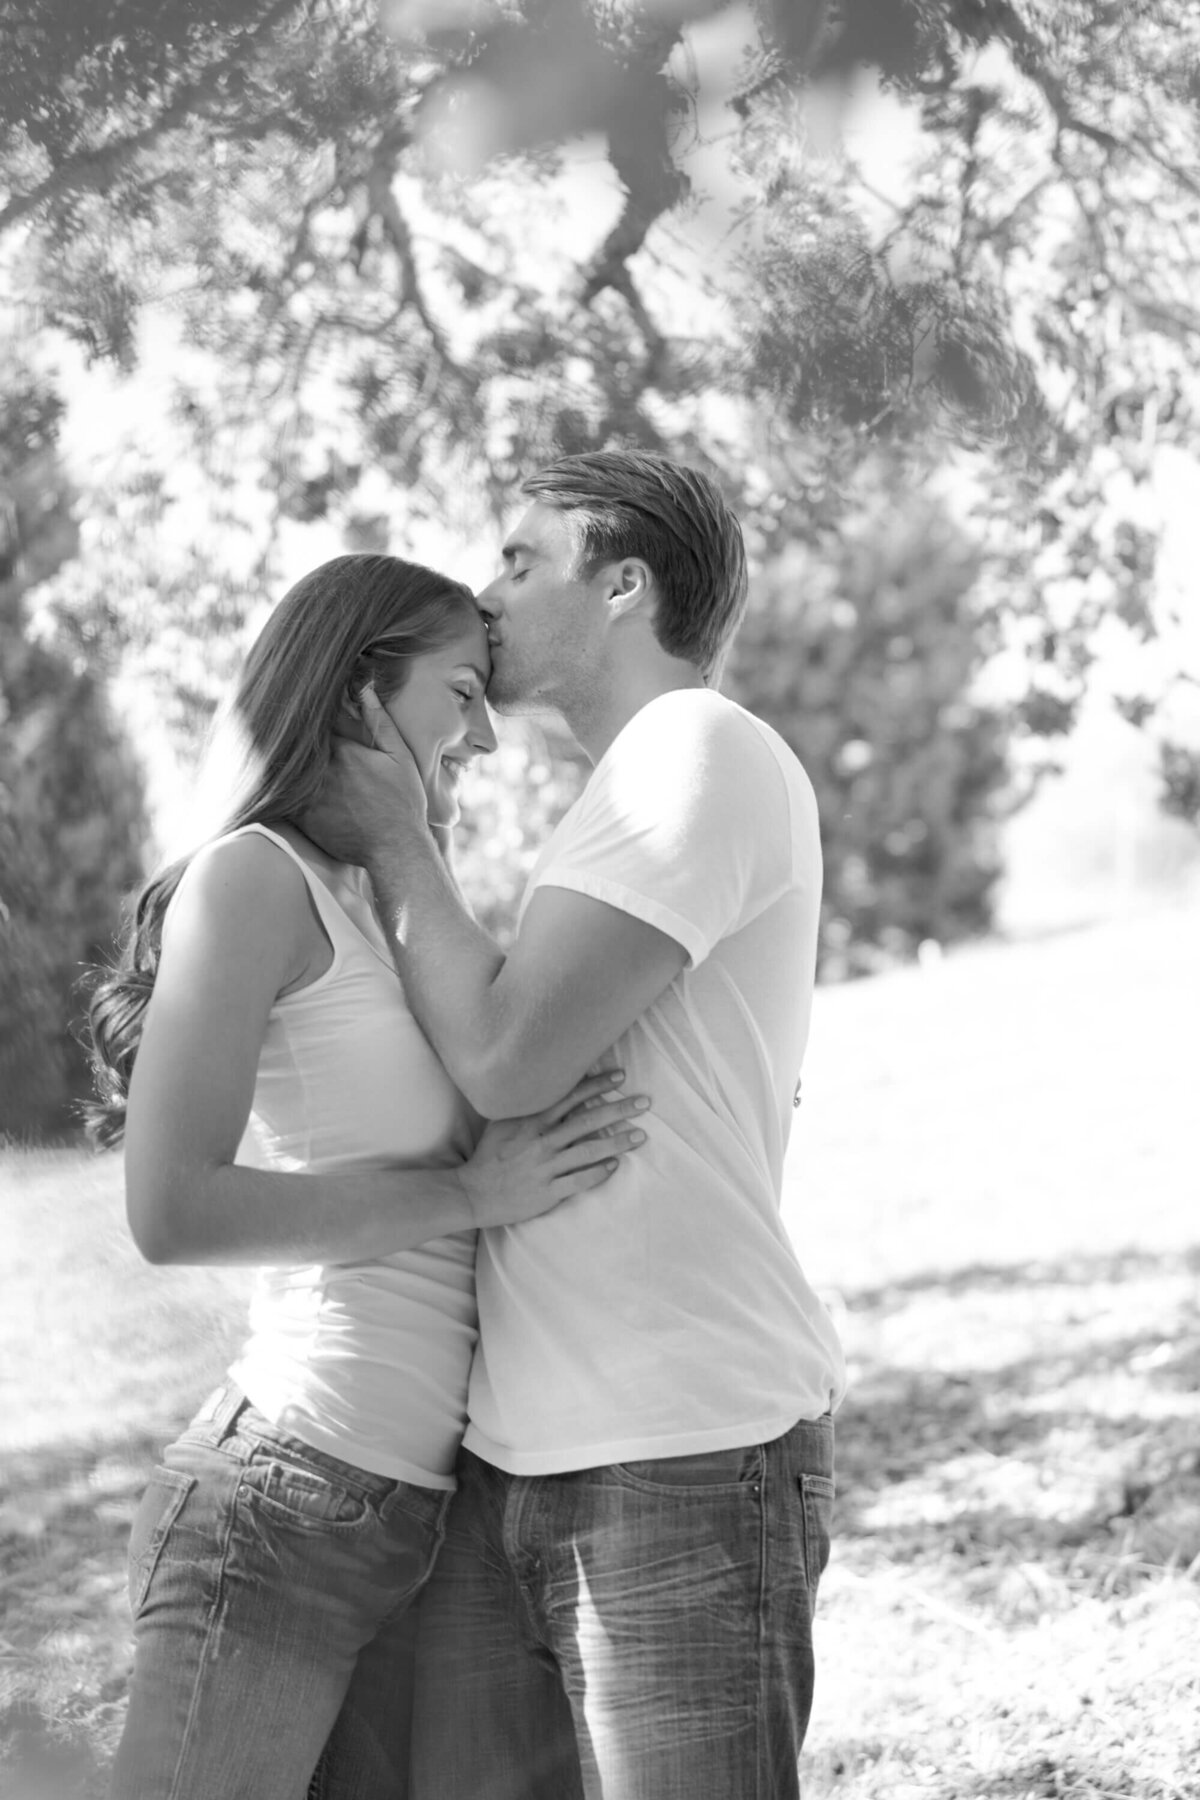 Newly engaged couple in jeans and white tshirts celebrate their casual engagement outdoors with a kiss on the forehead.